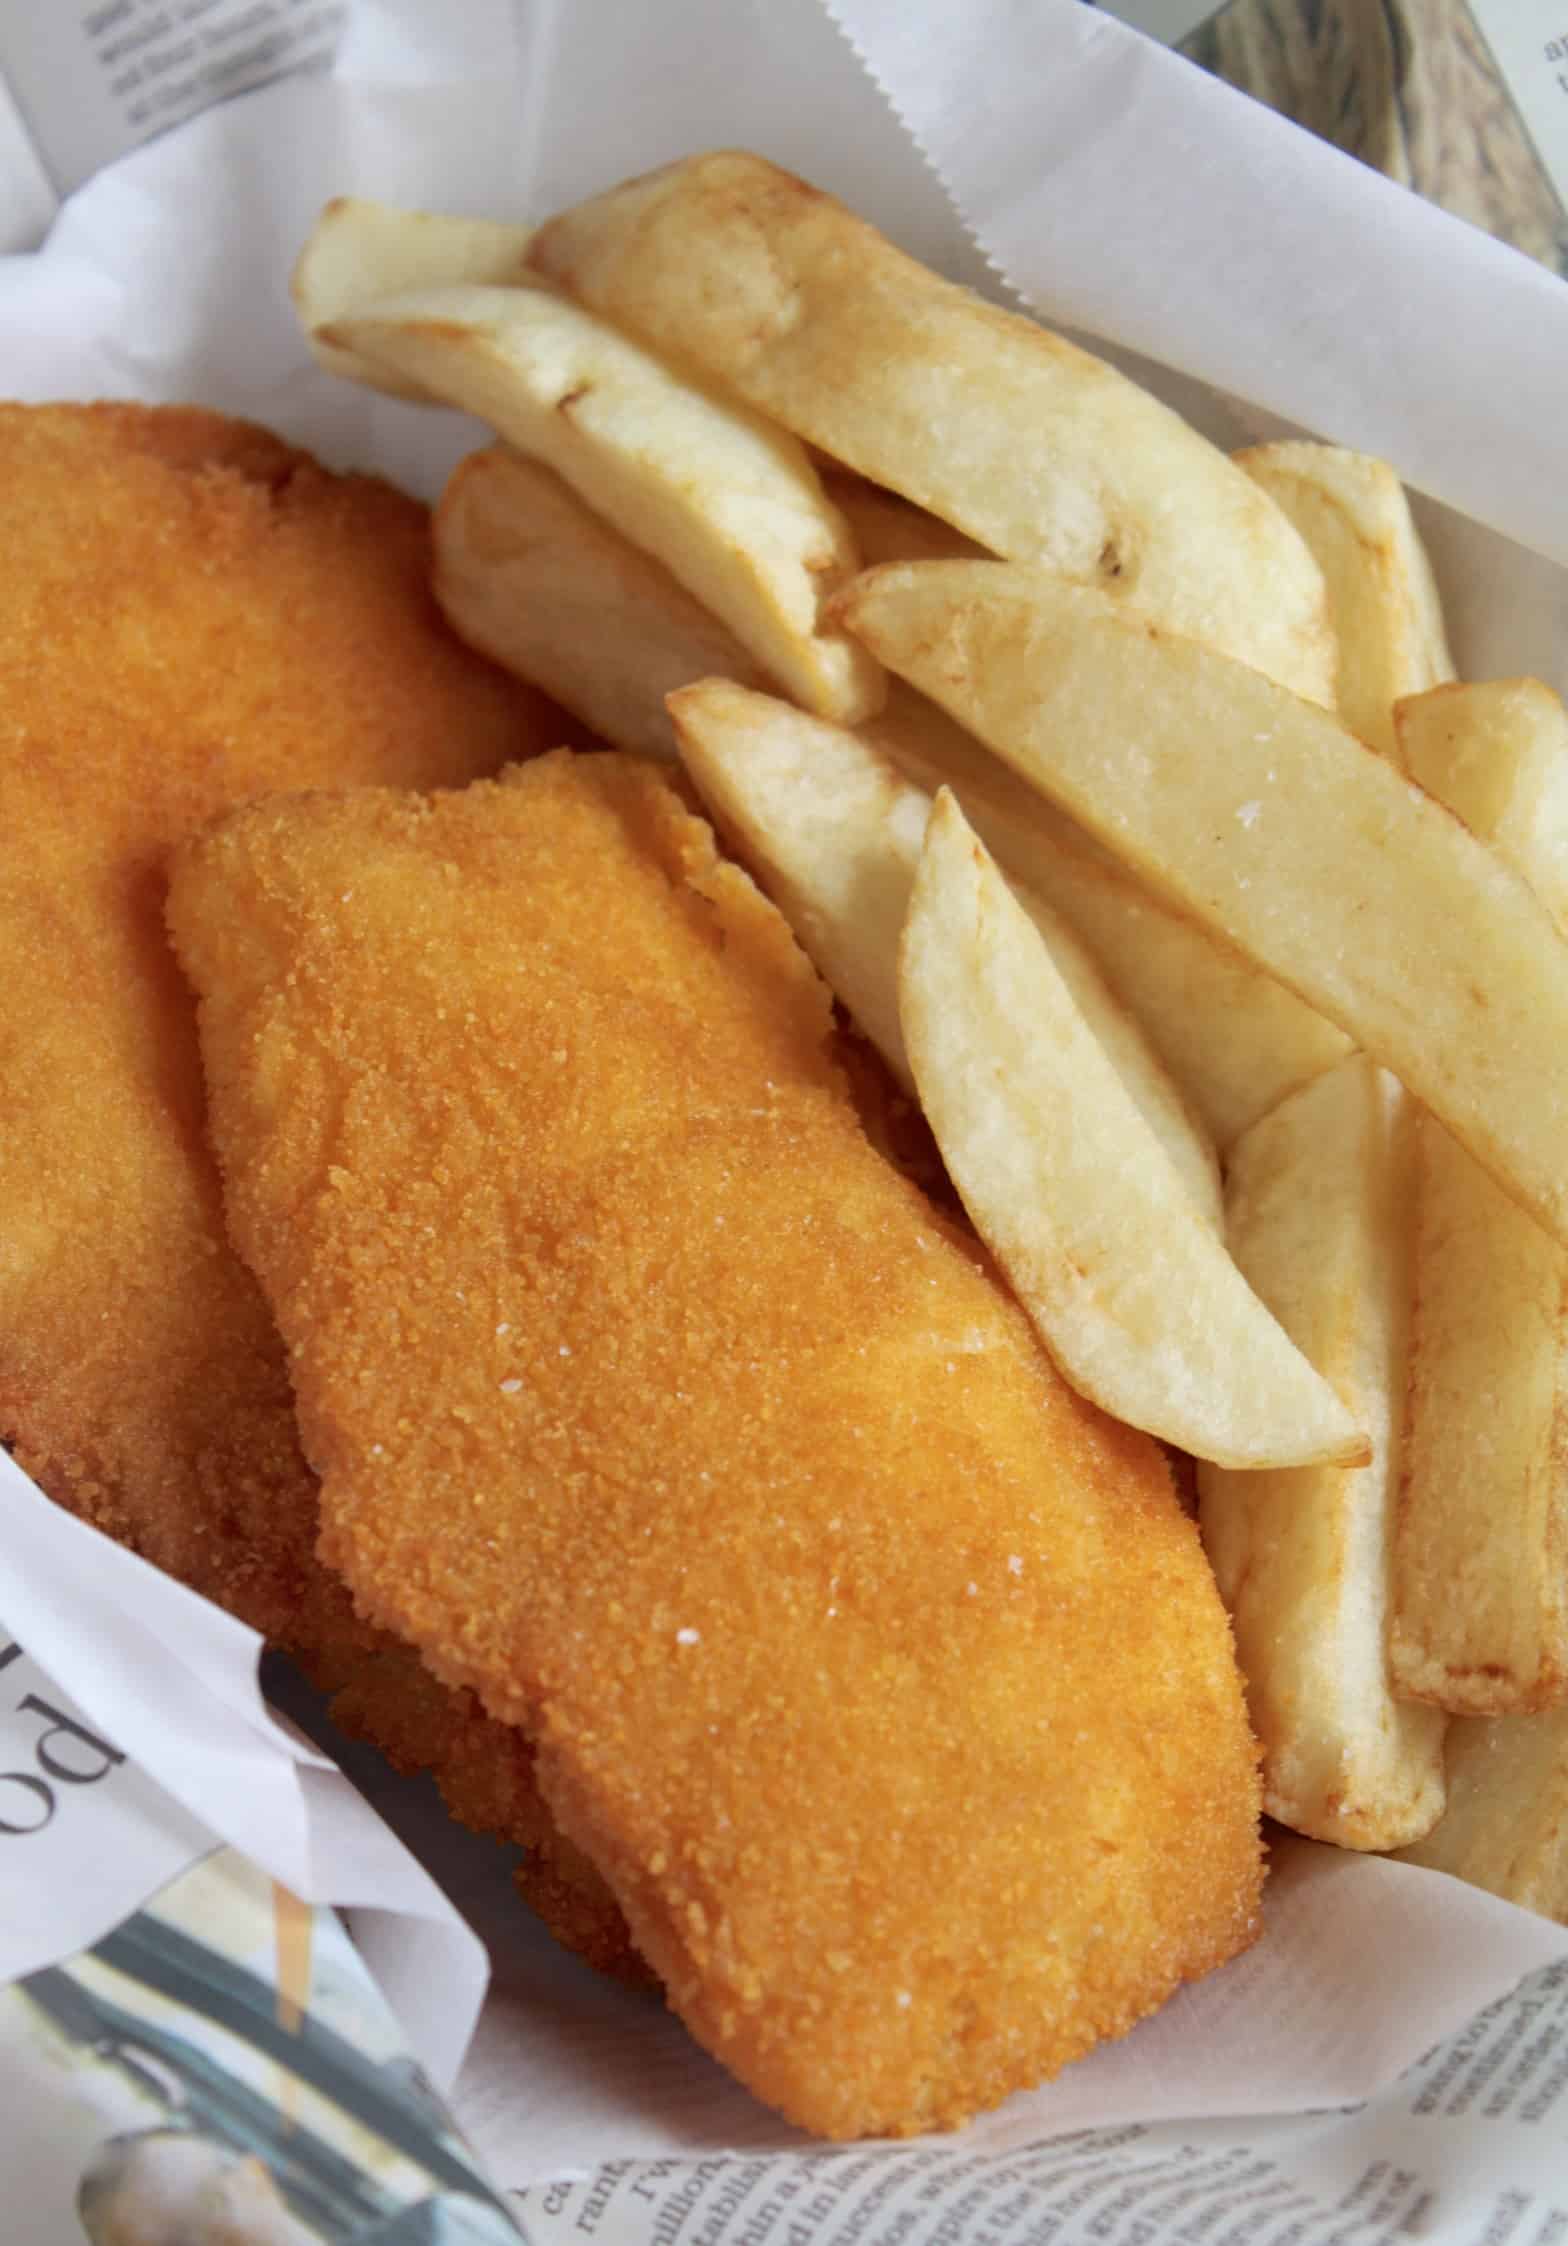 fish and chips in newspaper